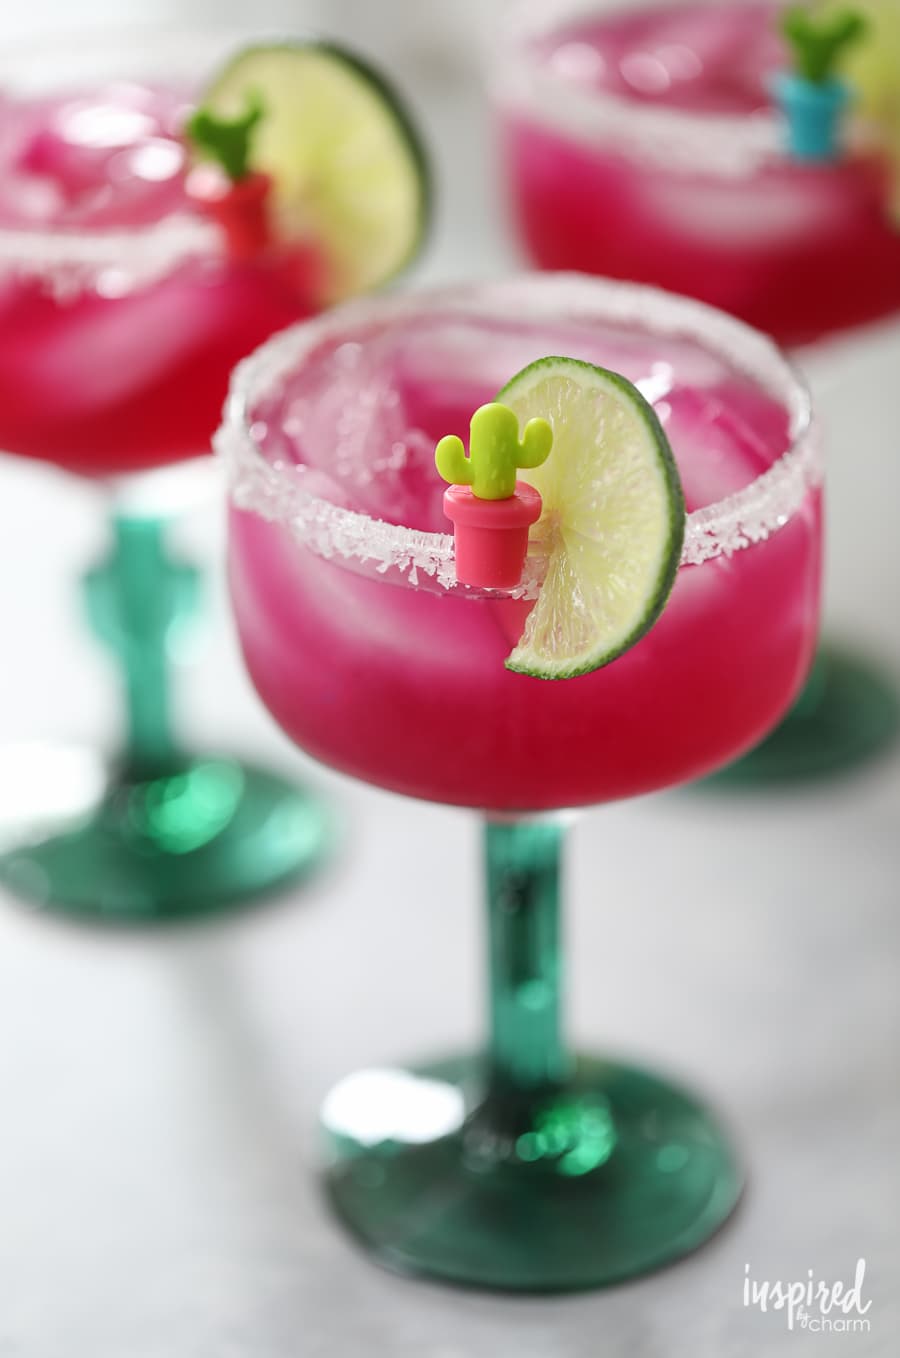 Celebrate with this unique and colorful cocktail: a Prickly Pear Margarita recipe served in a cactus glass. #pricklypear #margarita #cocktail #tequila #margaritas #recipe